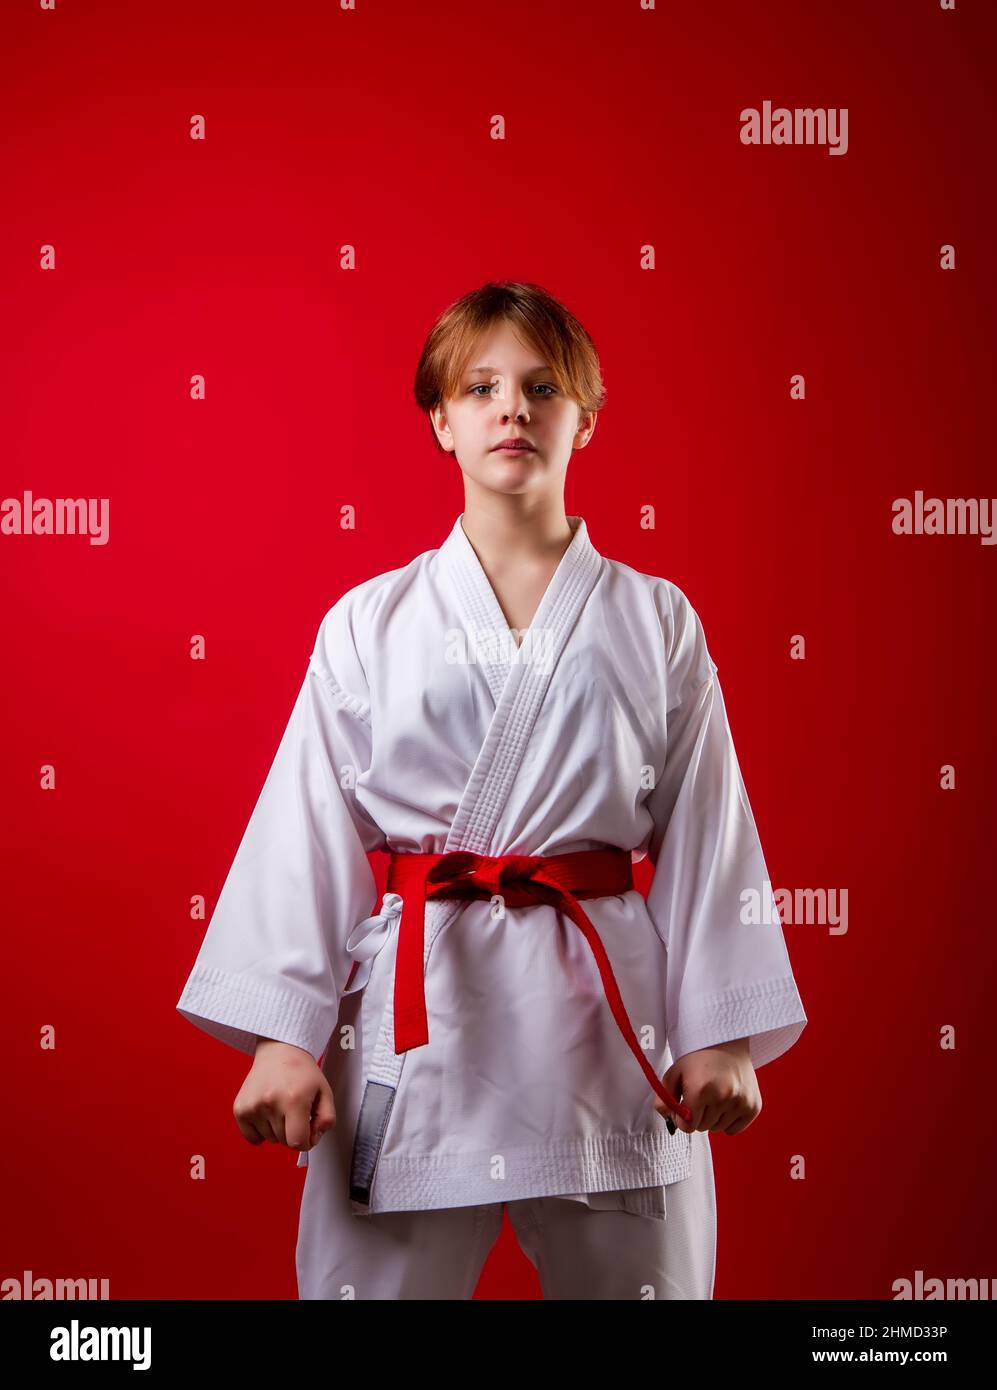 A young girl karateka in a white kimono and a red belt trains and performs a set of exercises on a bright red background Stock Photo